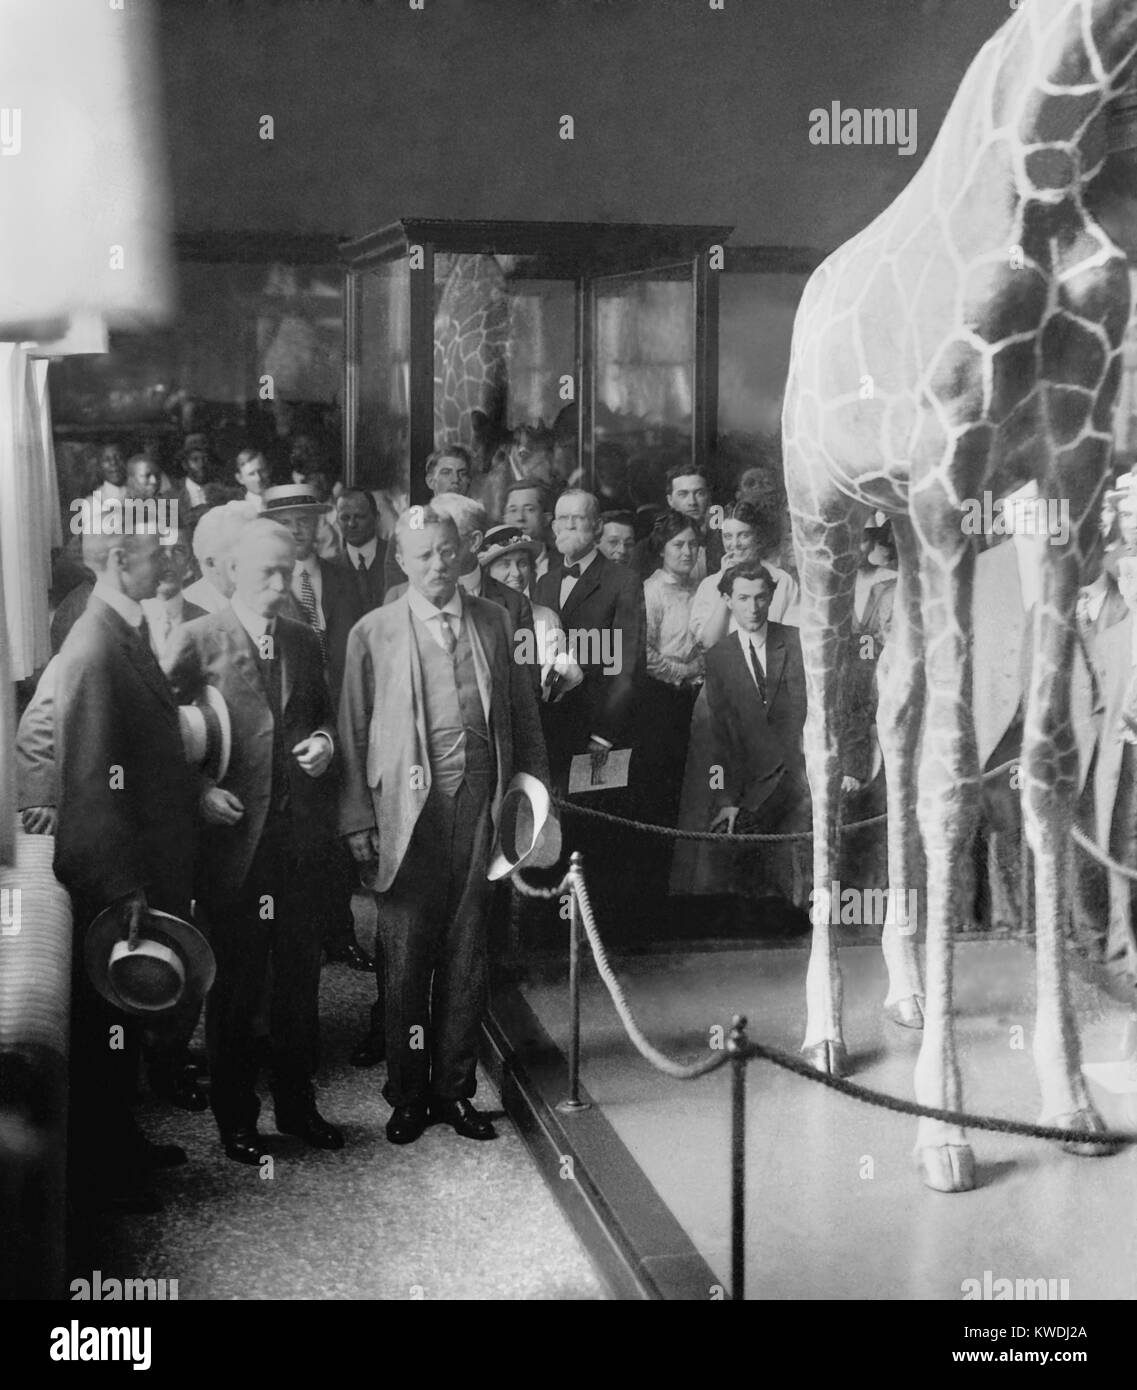 Col. Theodore Roosevelt at a ceremony at National Museum, c. 1914-1917. Now called the Smithsonian Museum of Natural History it holds Roosevelts East African flora and fauna specimens collected during the Smithsonian–Roosevelt African Expedition of 1909-10 (BSLOC 2017 8 69) Stock Photo